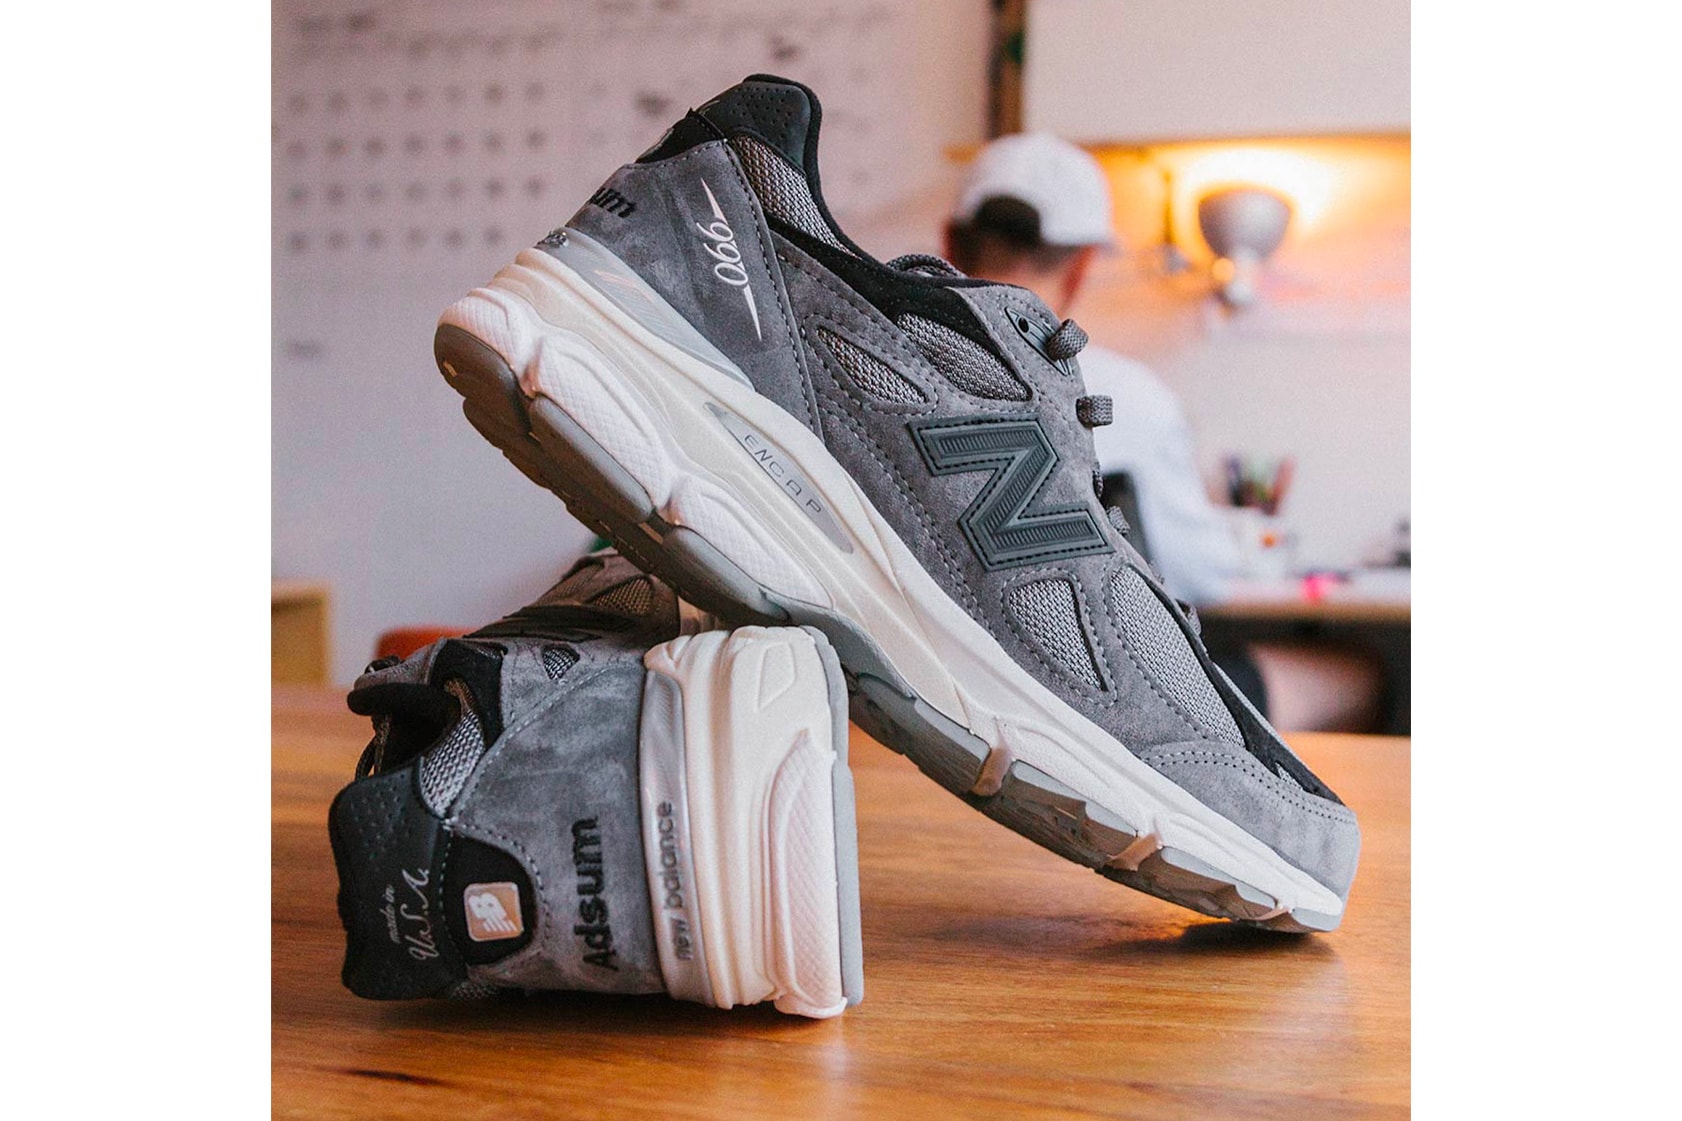 Adsum New Balance 990v3 Friends & Family grey purchase price retail dad shoe sneaker